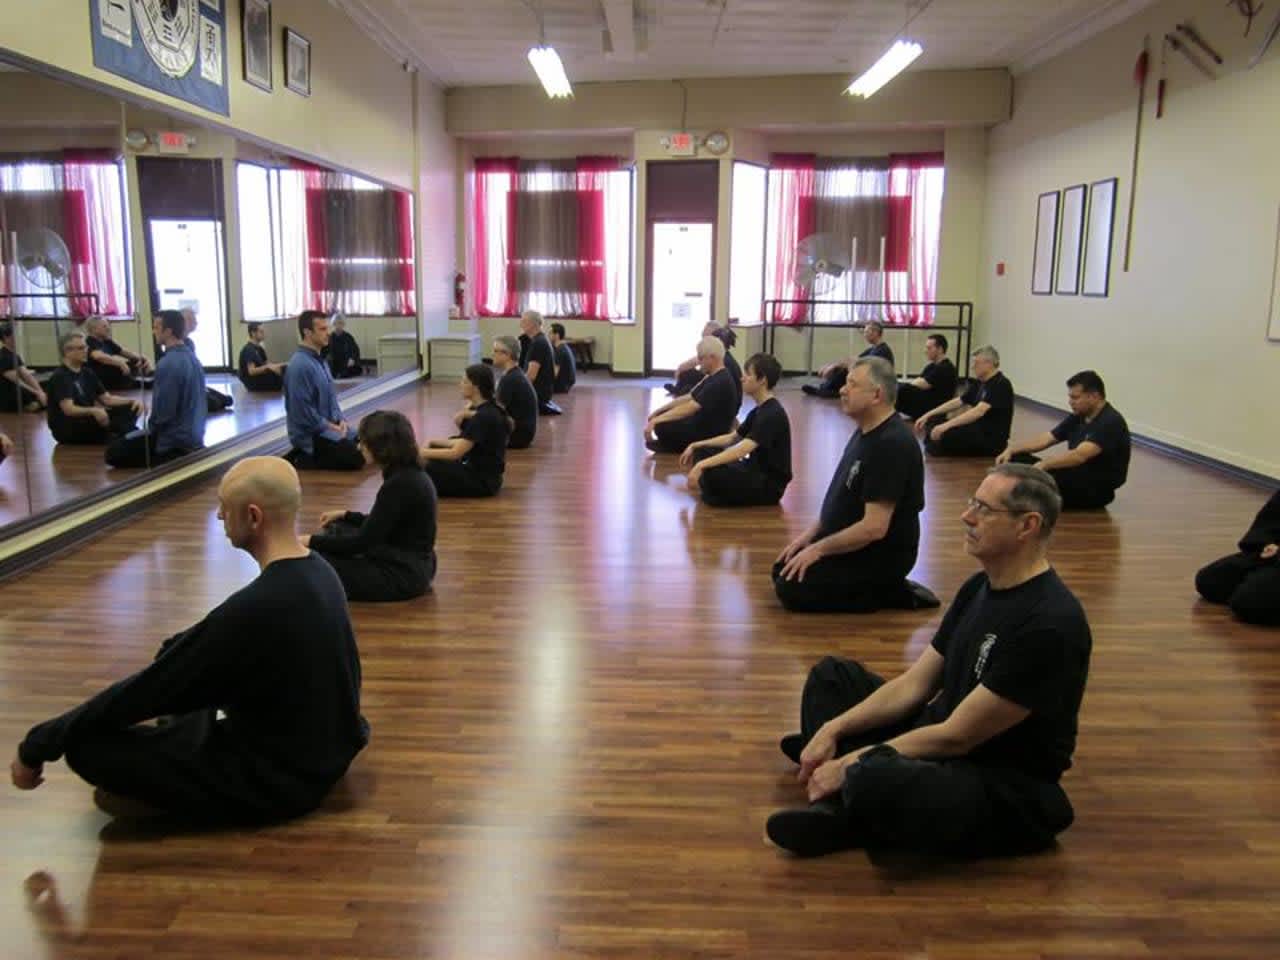 The Blue Dragon School of Martial Arts is holding a meditation session to relieve holiday stress.